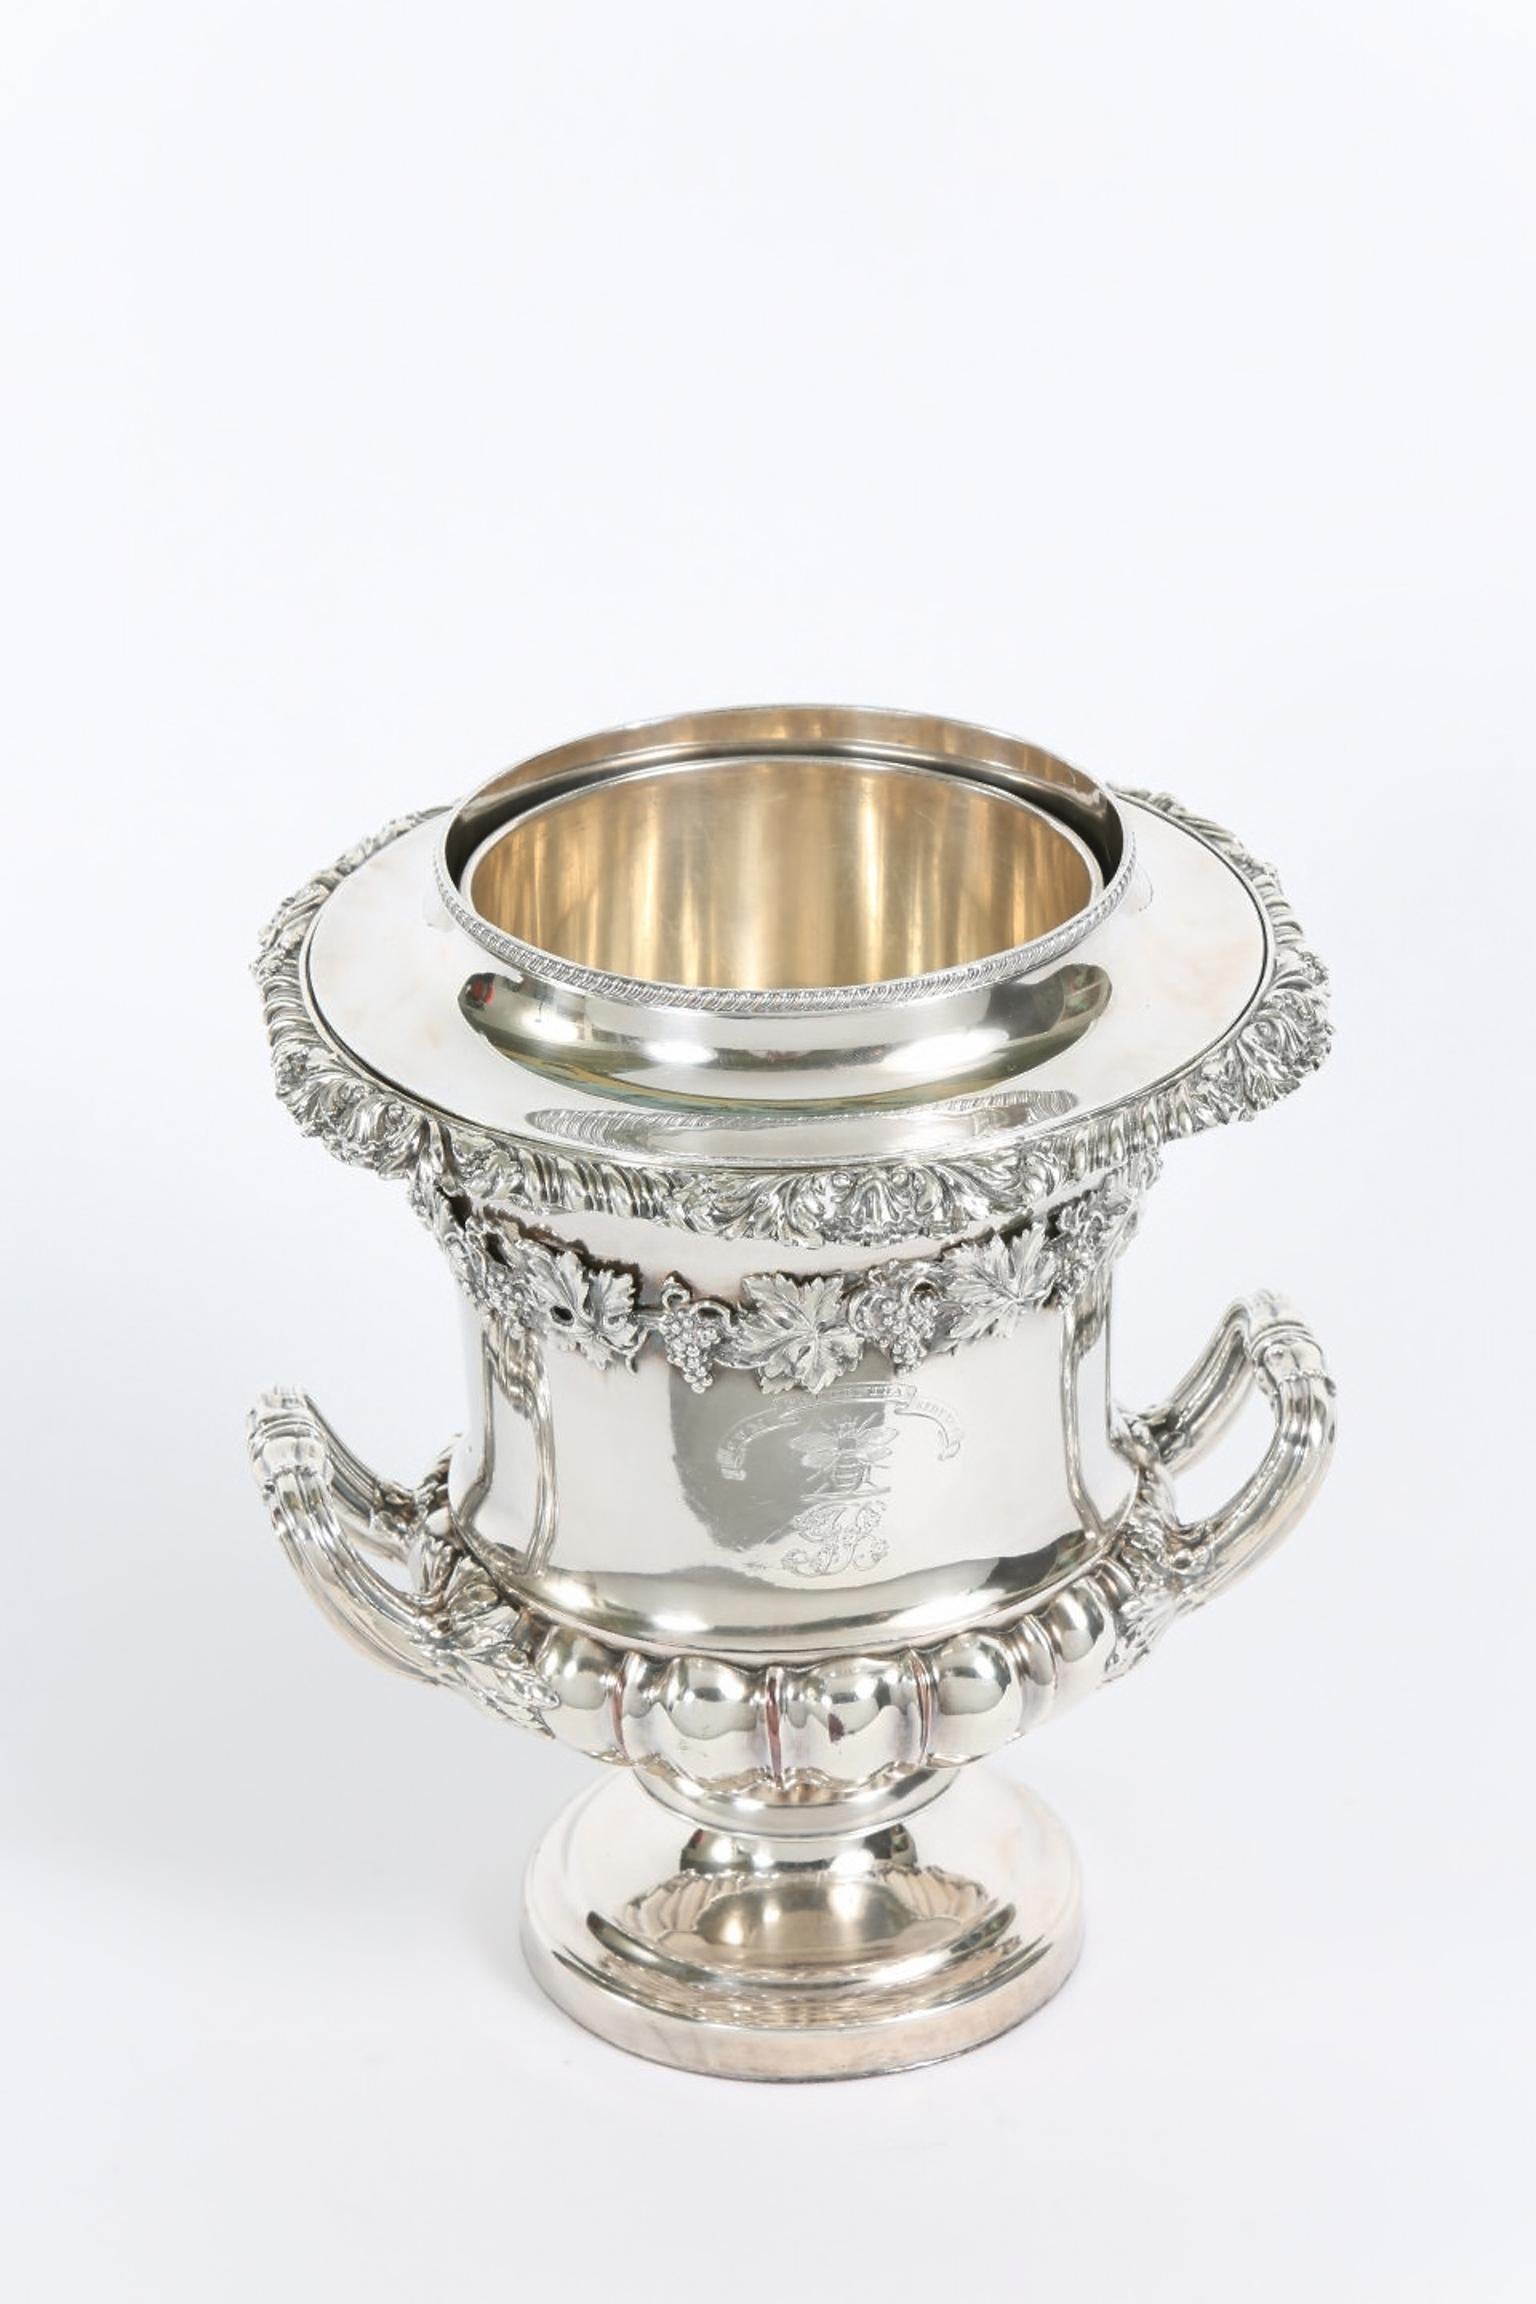 Impressive late 19th century English silver plated wine cooler with ice holding receptacle & exterior armorial crest design details. The cooler is in great antique condition with normal wear appropriate with age / use . The cooler measure about 10